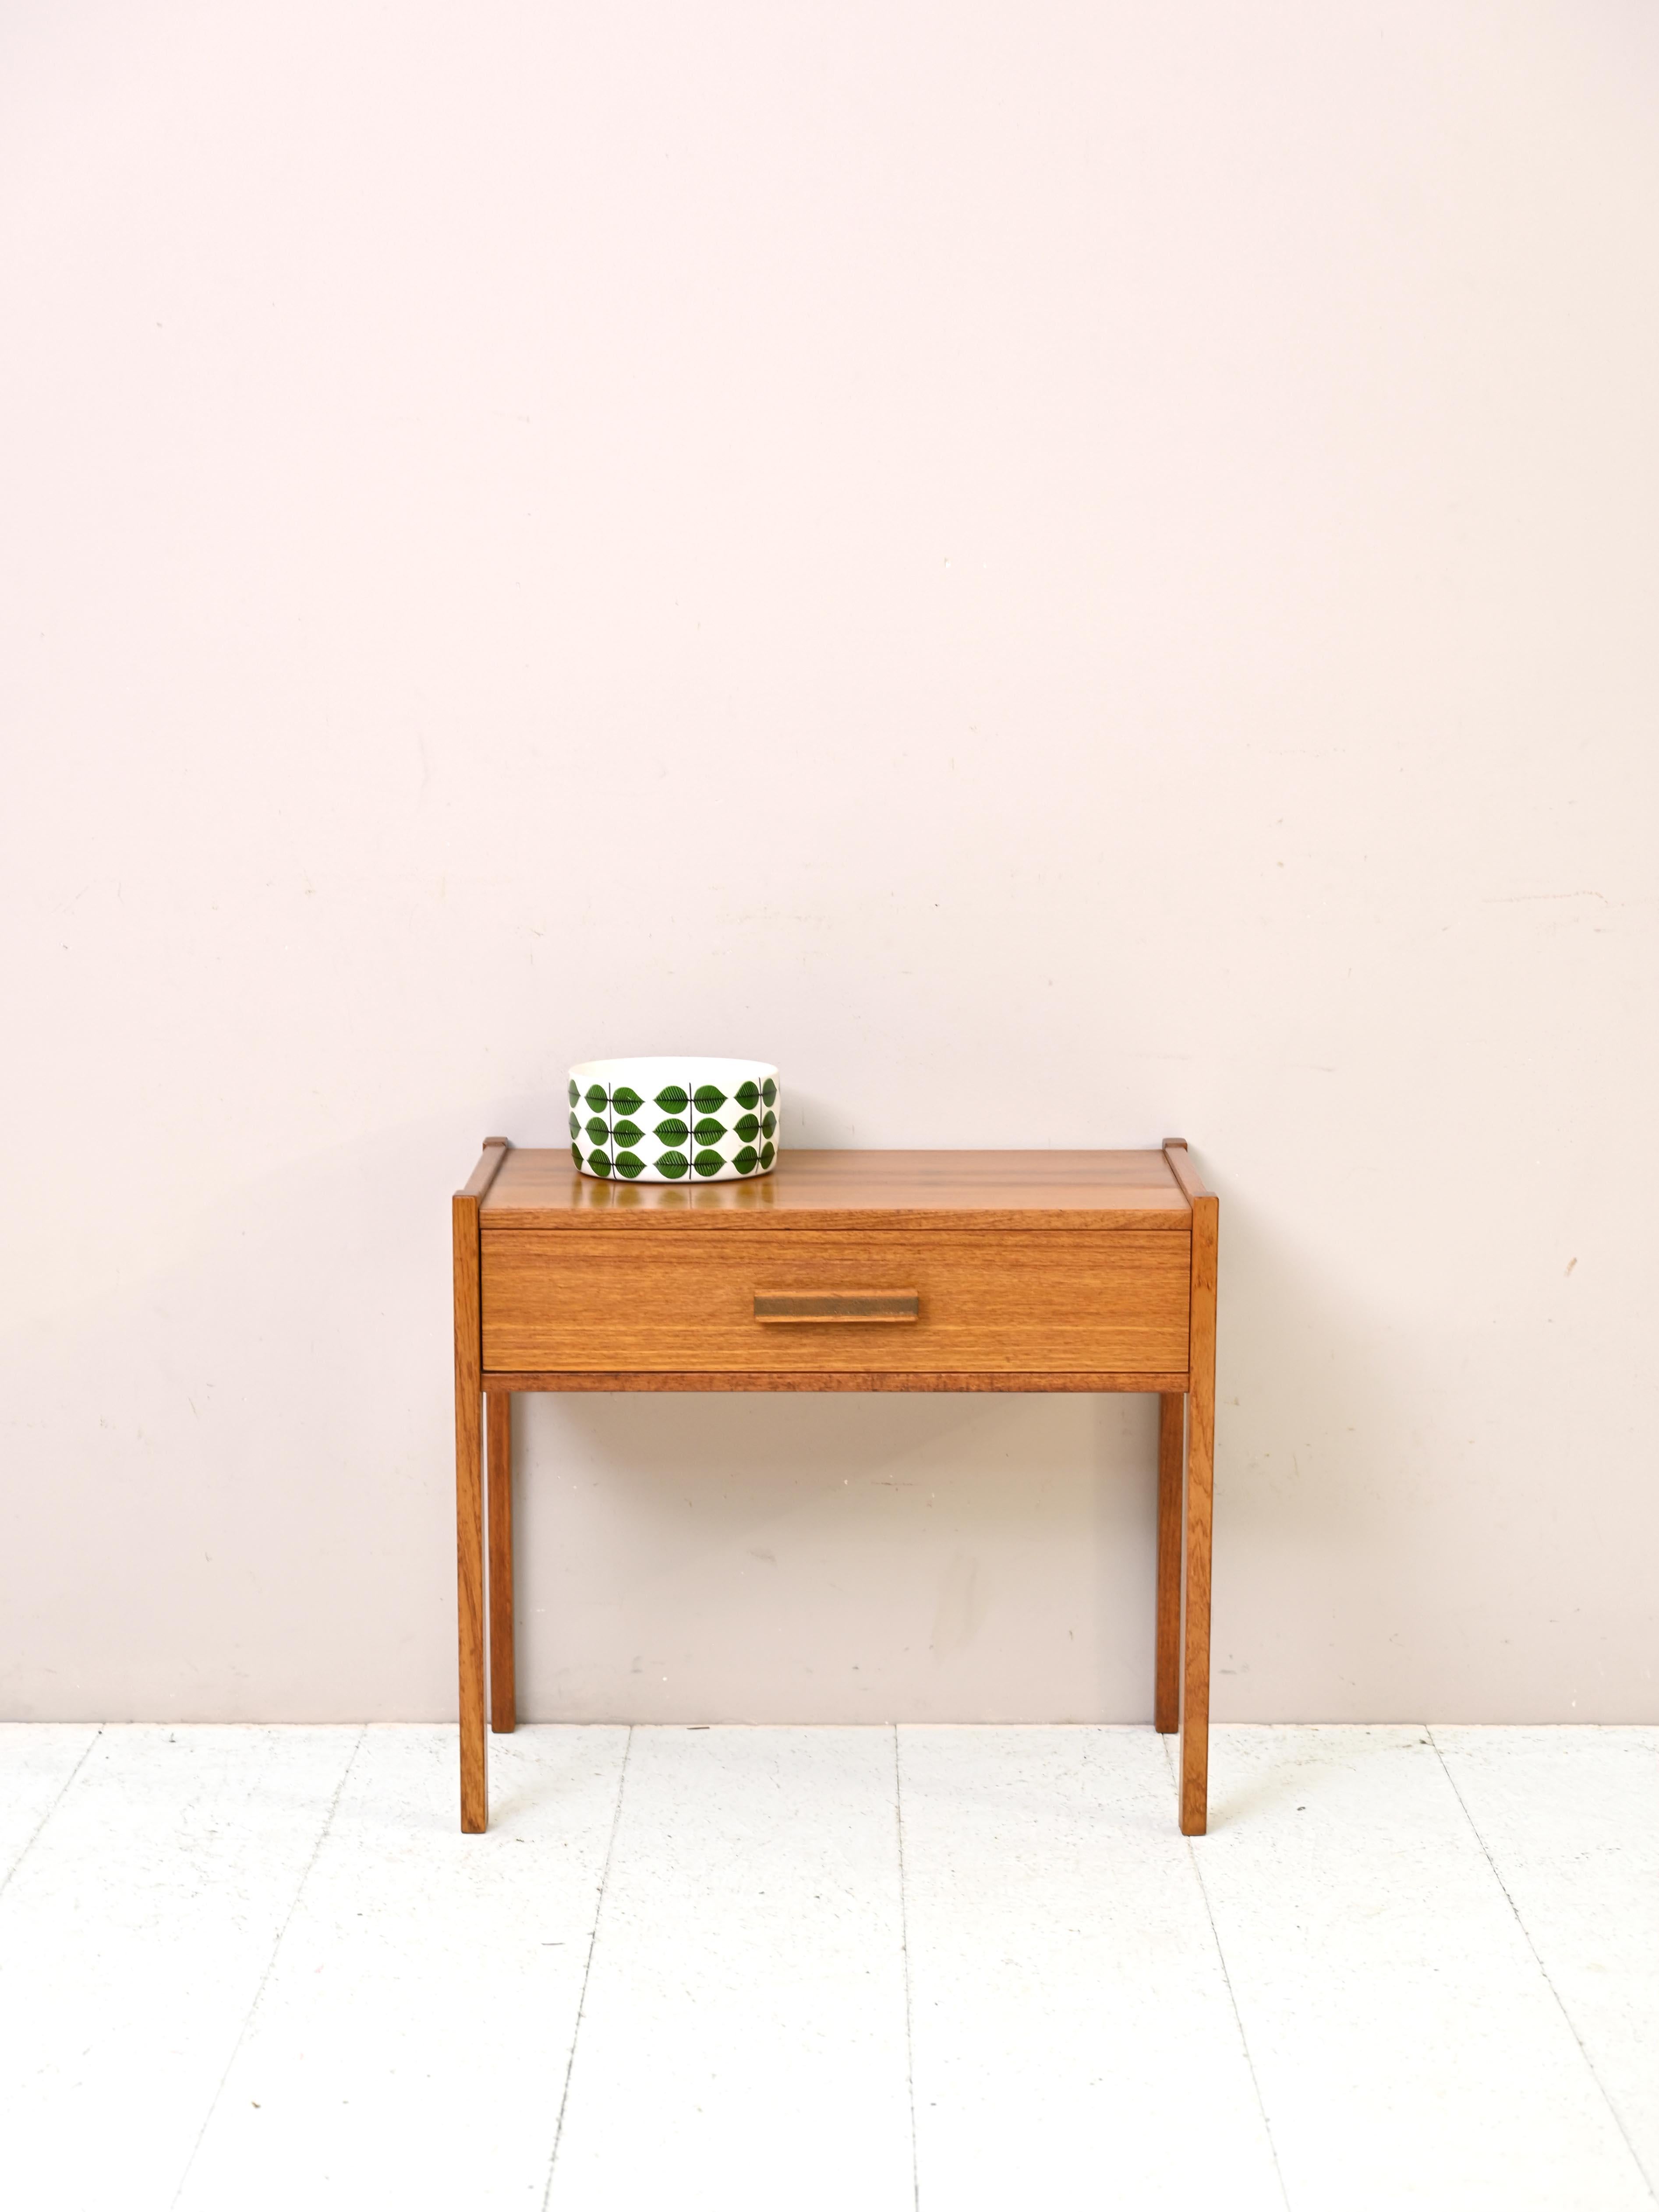 Vintage teak coffee table from the 1960s.
A unique piece of furniture that reflects the elegant and functional design of the 1960s. This teak side table features thin square legs and a distinctive wooden handle. Suitable for any room in the home,